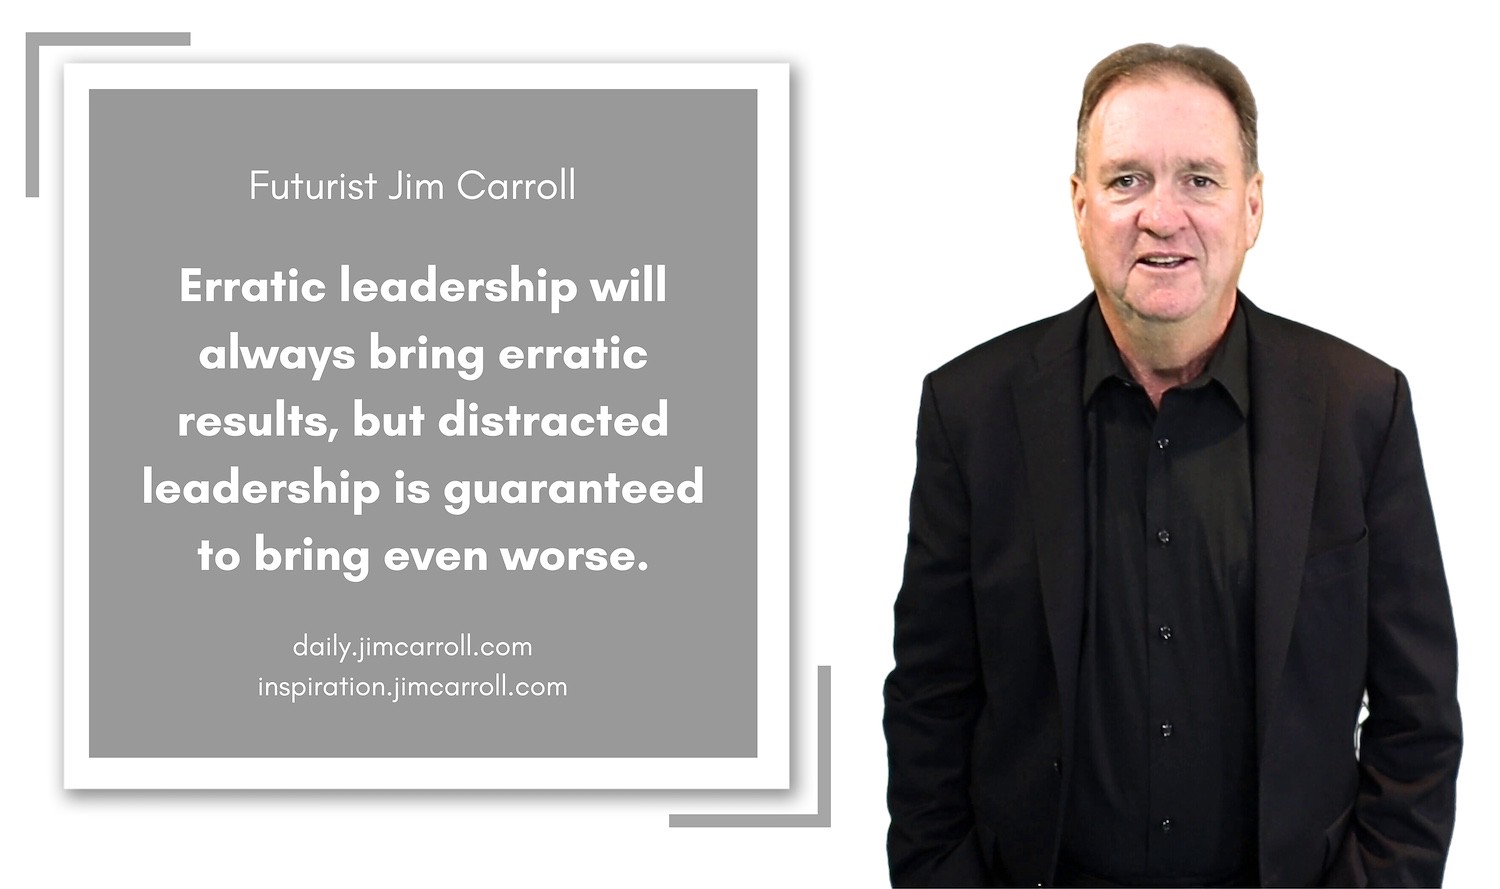 "Erratic leadership will always bring erratic results, but distracted leadership is guaranteed to bring even worse" - Futurist Jim Carroll